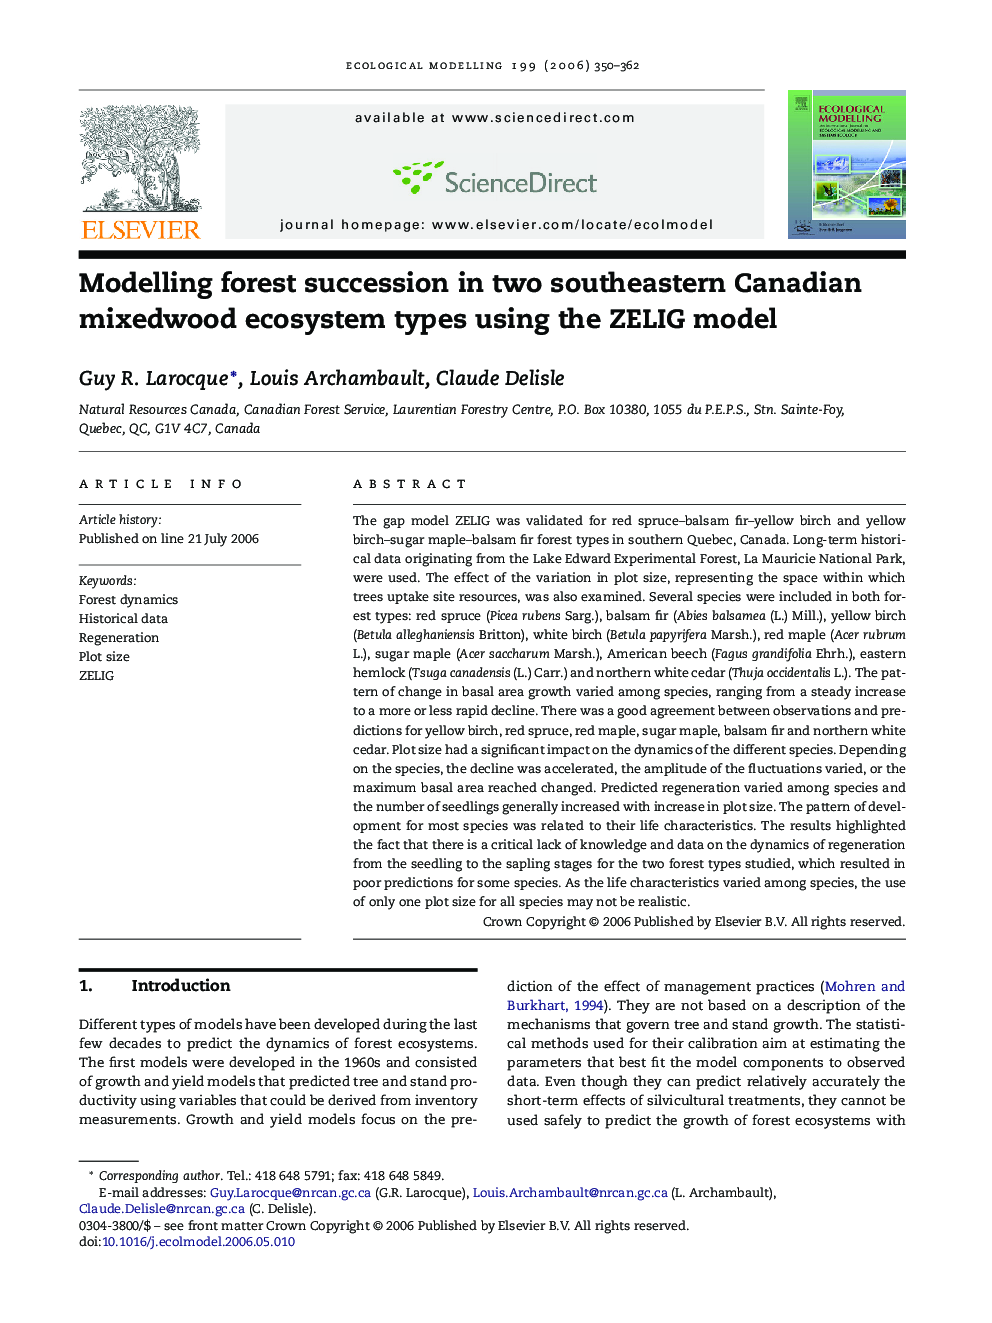 Modelling forest succession in two southeastern Canadian mixedwood ecosystem types using the ZELIG model